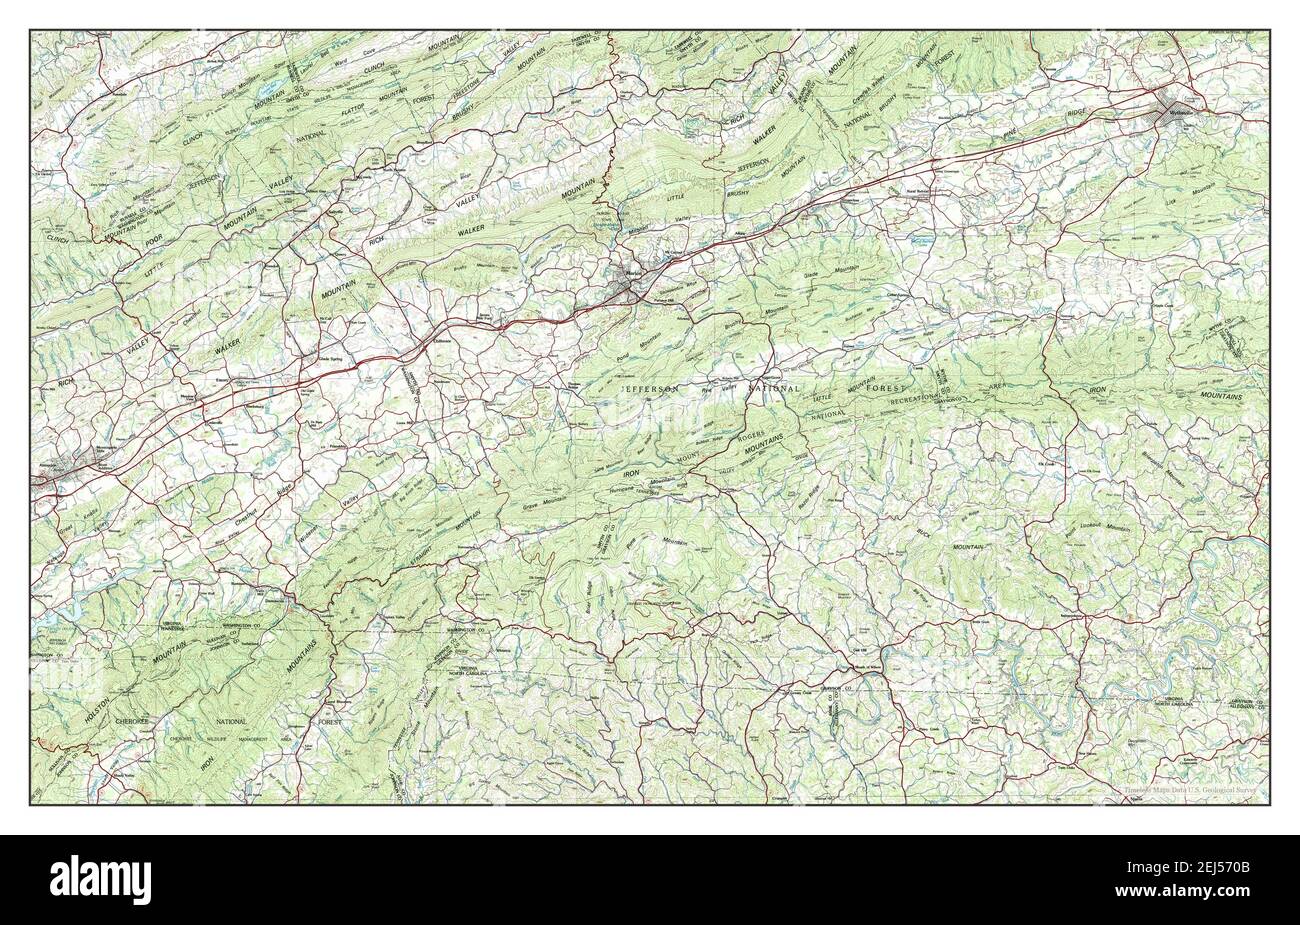 Wytheville, Virginia, map 1982, 1:100000, United States of America by Timeless Maps, data U.S. Geological Survey Stock Photo